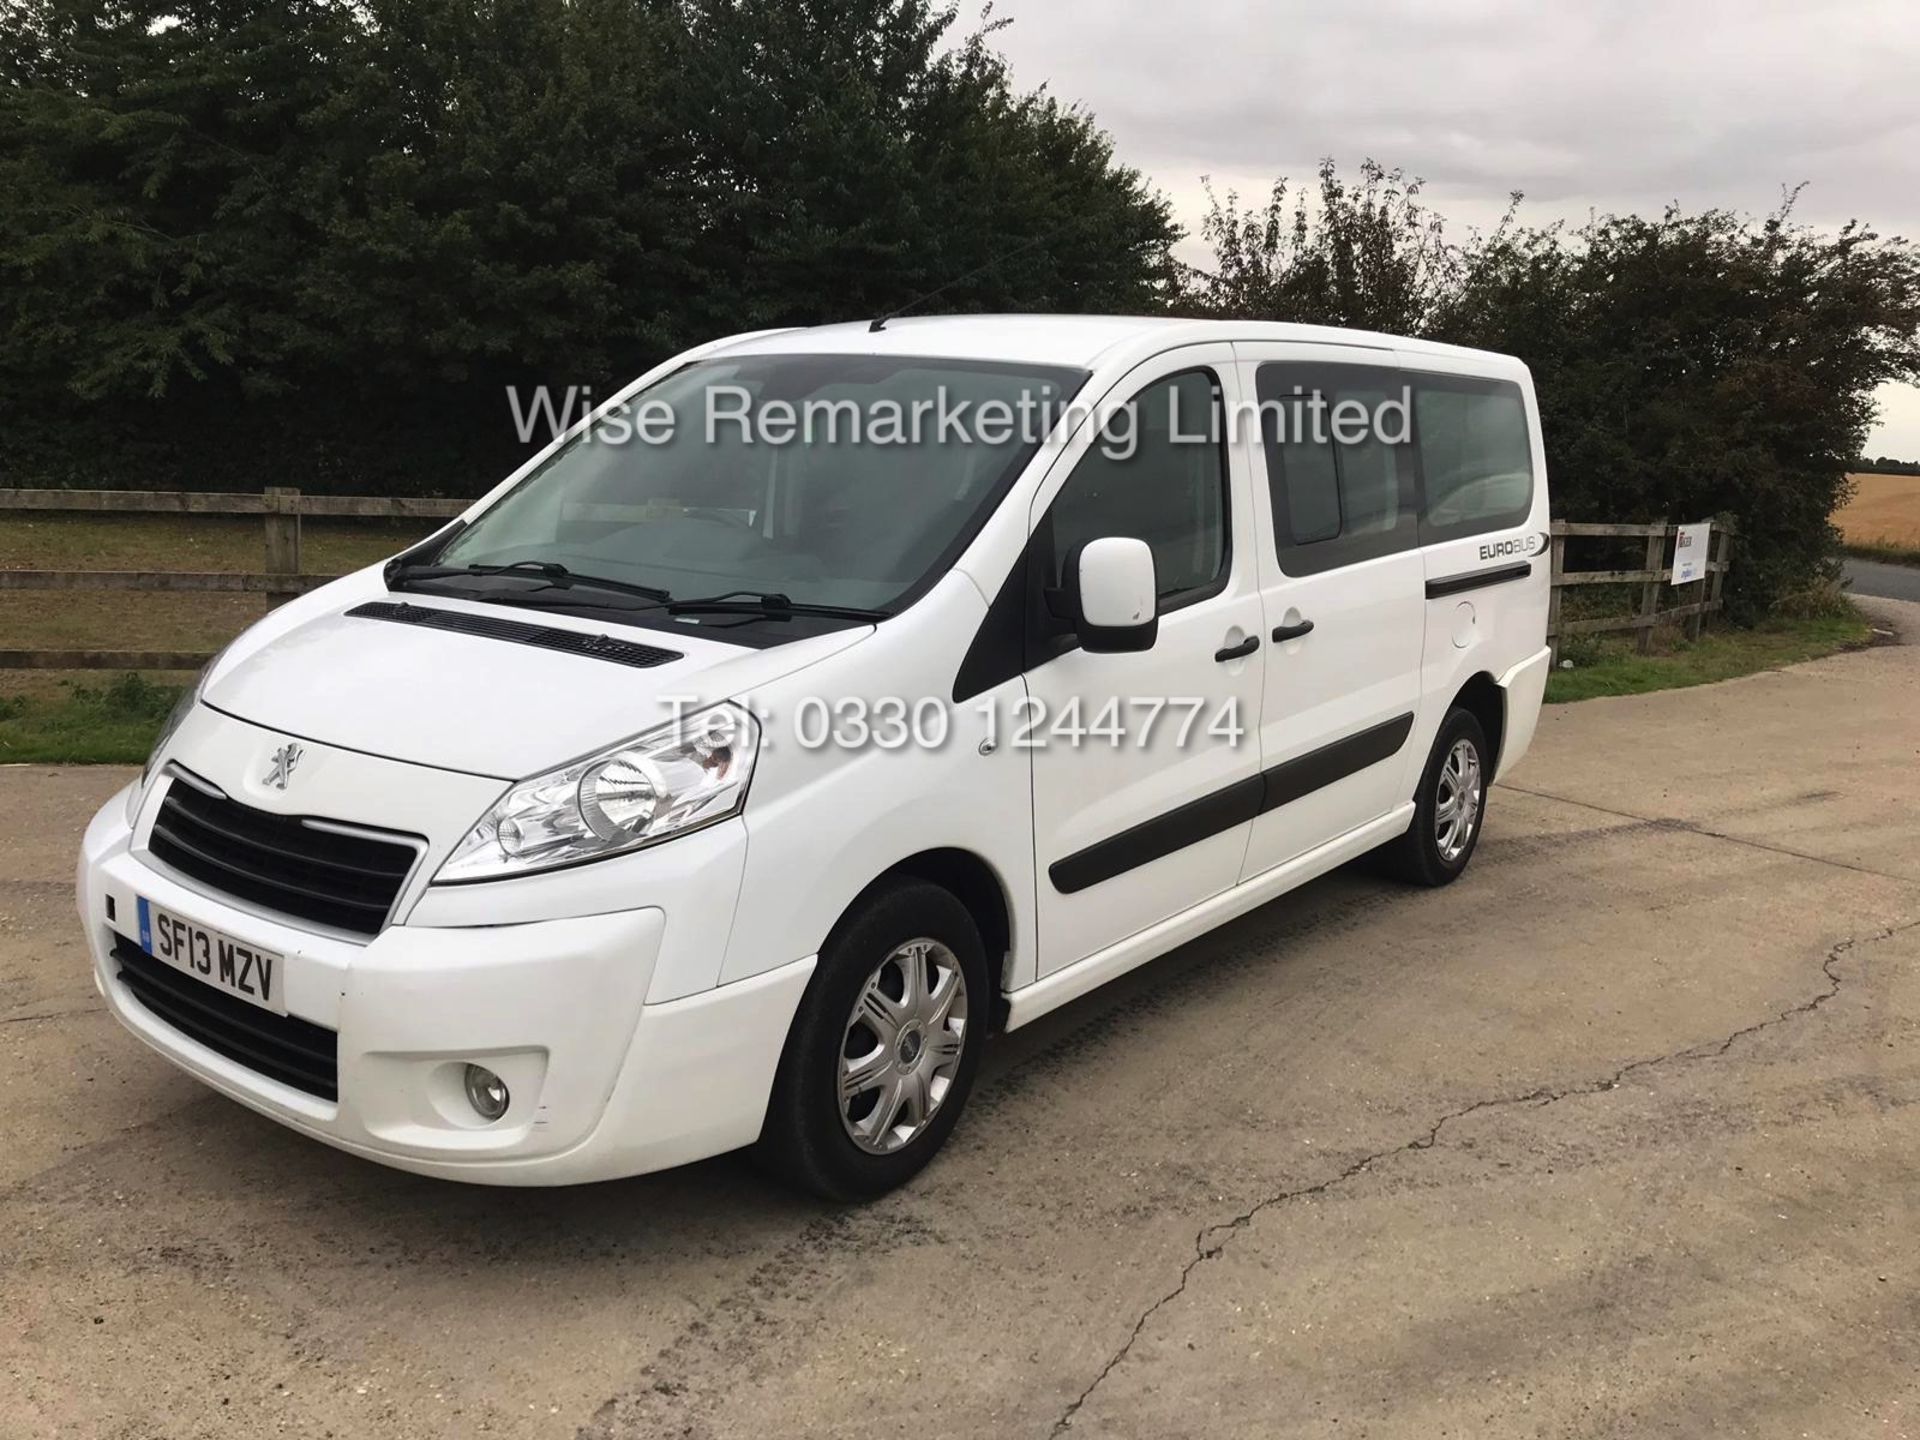 PEUGEOT EUROBUS S *MPV 8 SEATER* 2.0l (2013 - 13 REG) **AIR CON** - 1 OWNER FROM NEW